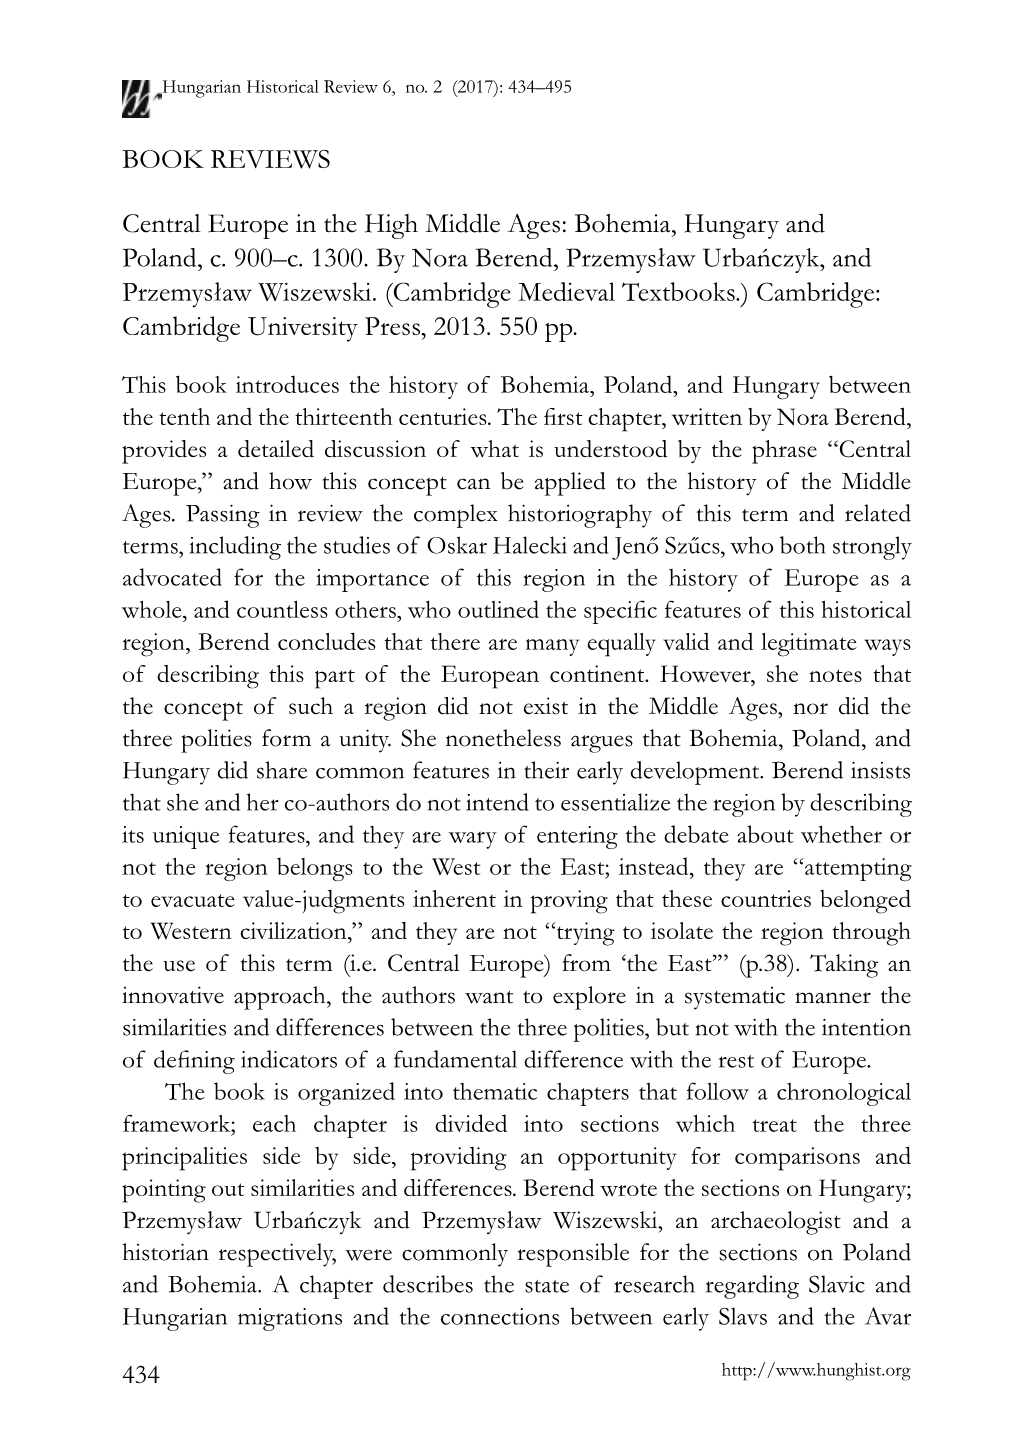 BOOK REVIEWS Central Europe in the High Middle Ages: Bohemia